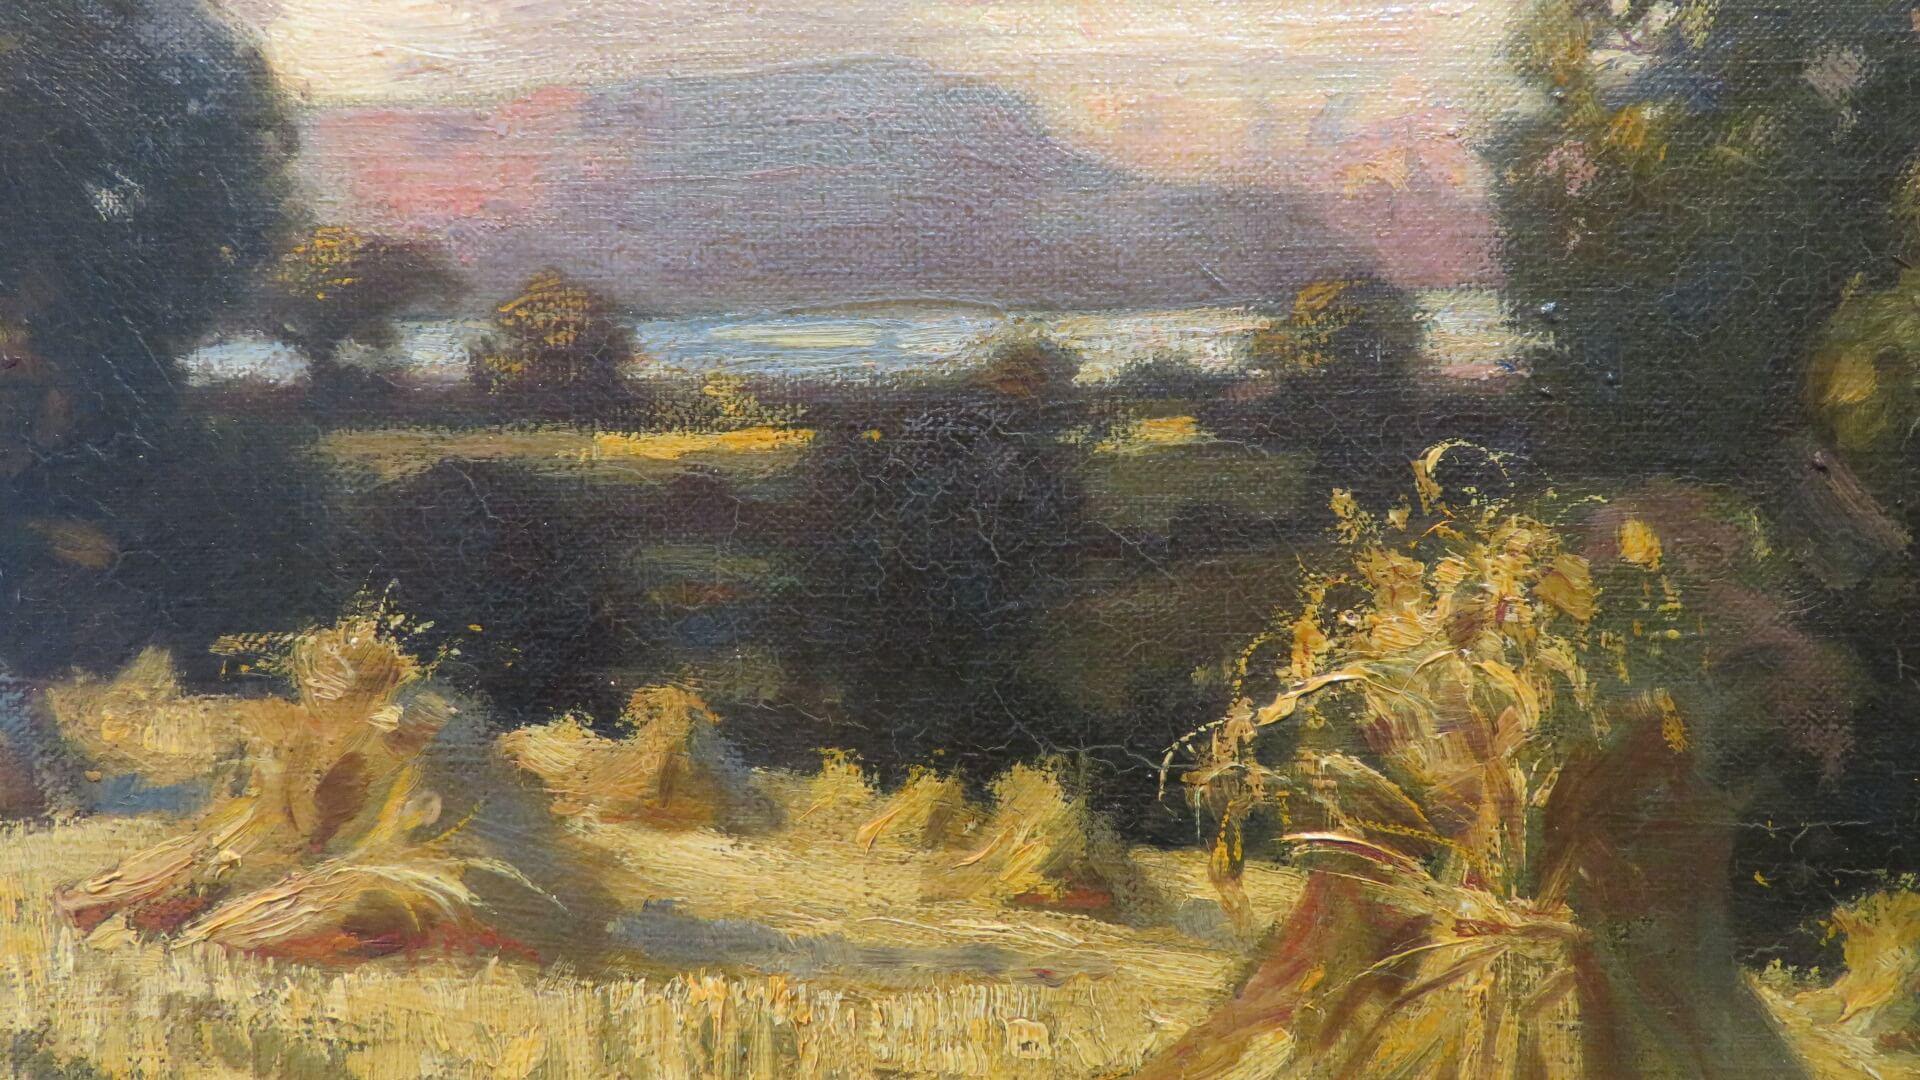 ARTIST: Noel Denholm Davis (1876-1950) British

TITLE: “Harvest Time”

SIGNED: lower left and further inscribed verso

MEDIUM: Oil on board

SIZE:  42cm x 32cm inc frame

CONDITION: very good

DETAIL: Primarily a portrait painter, Davis was born in